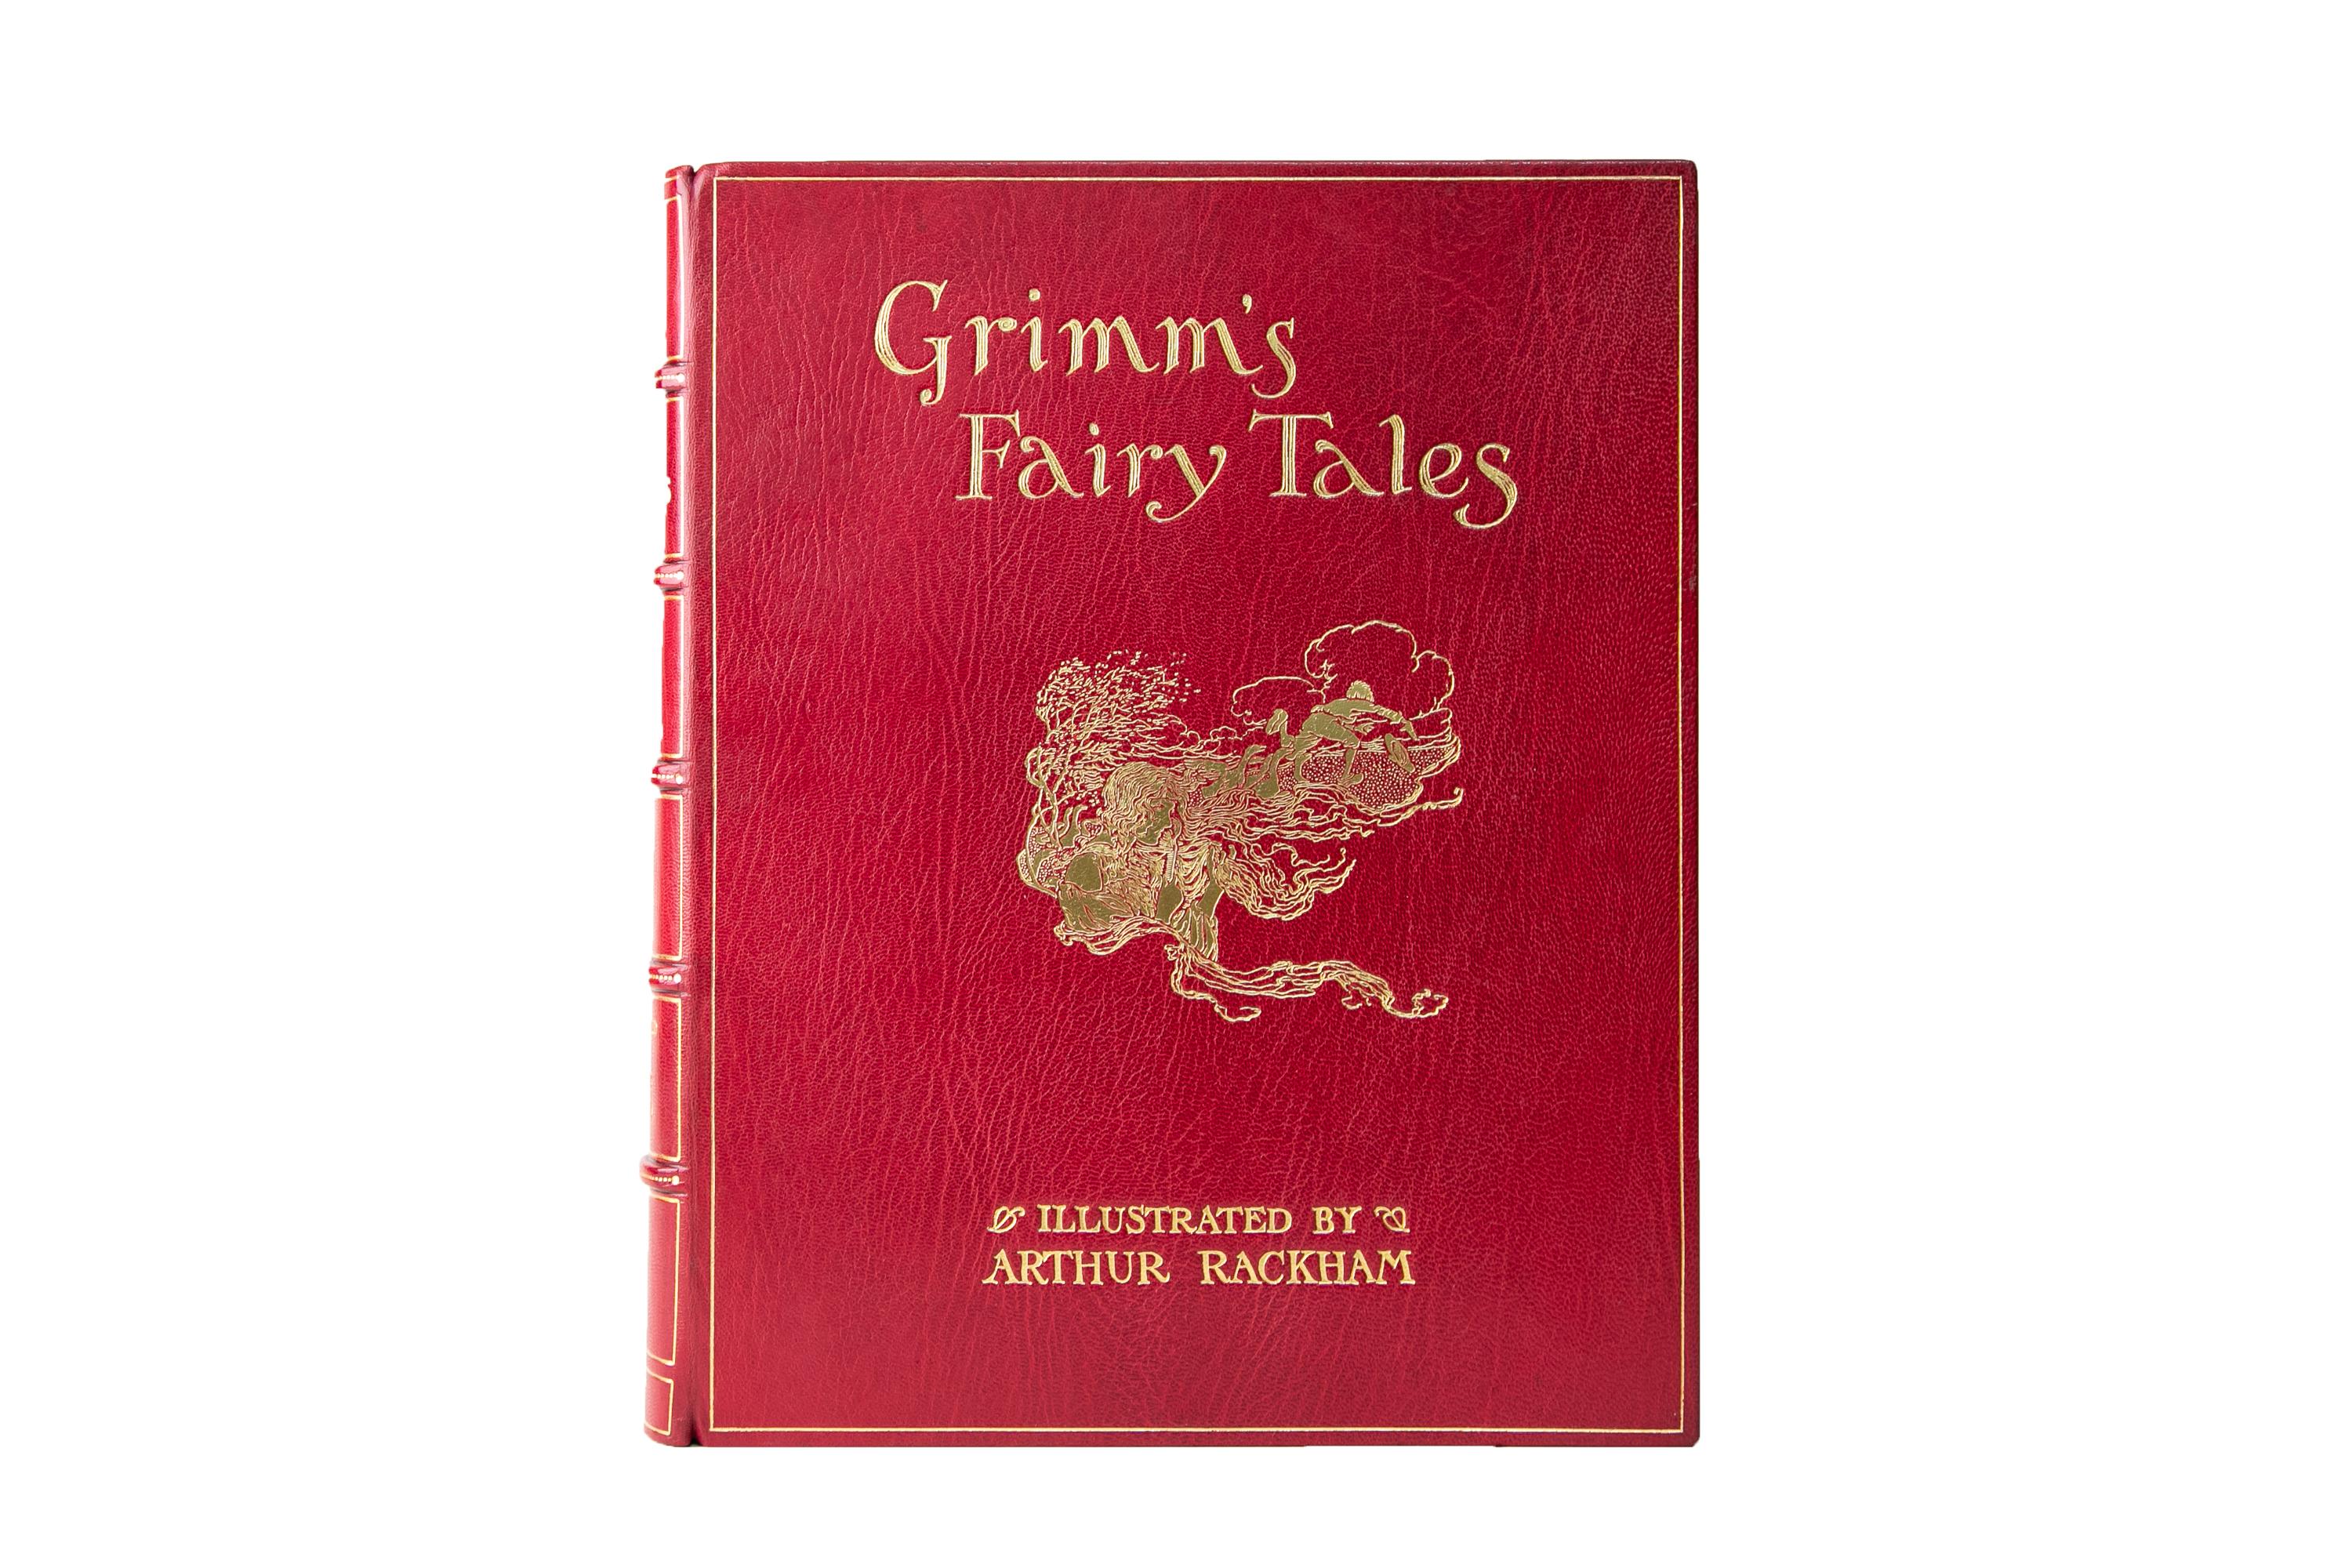 1 Volume. The Grimm Brothers, Grimm's Fairy Tales. Signed Limited Edition. Bound by The Chelsea Bindery in full red morocco. The cover displays borders, central imagery, and title lettering, all gilt-tooled. The spines display raised bands,